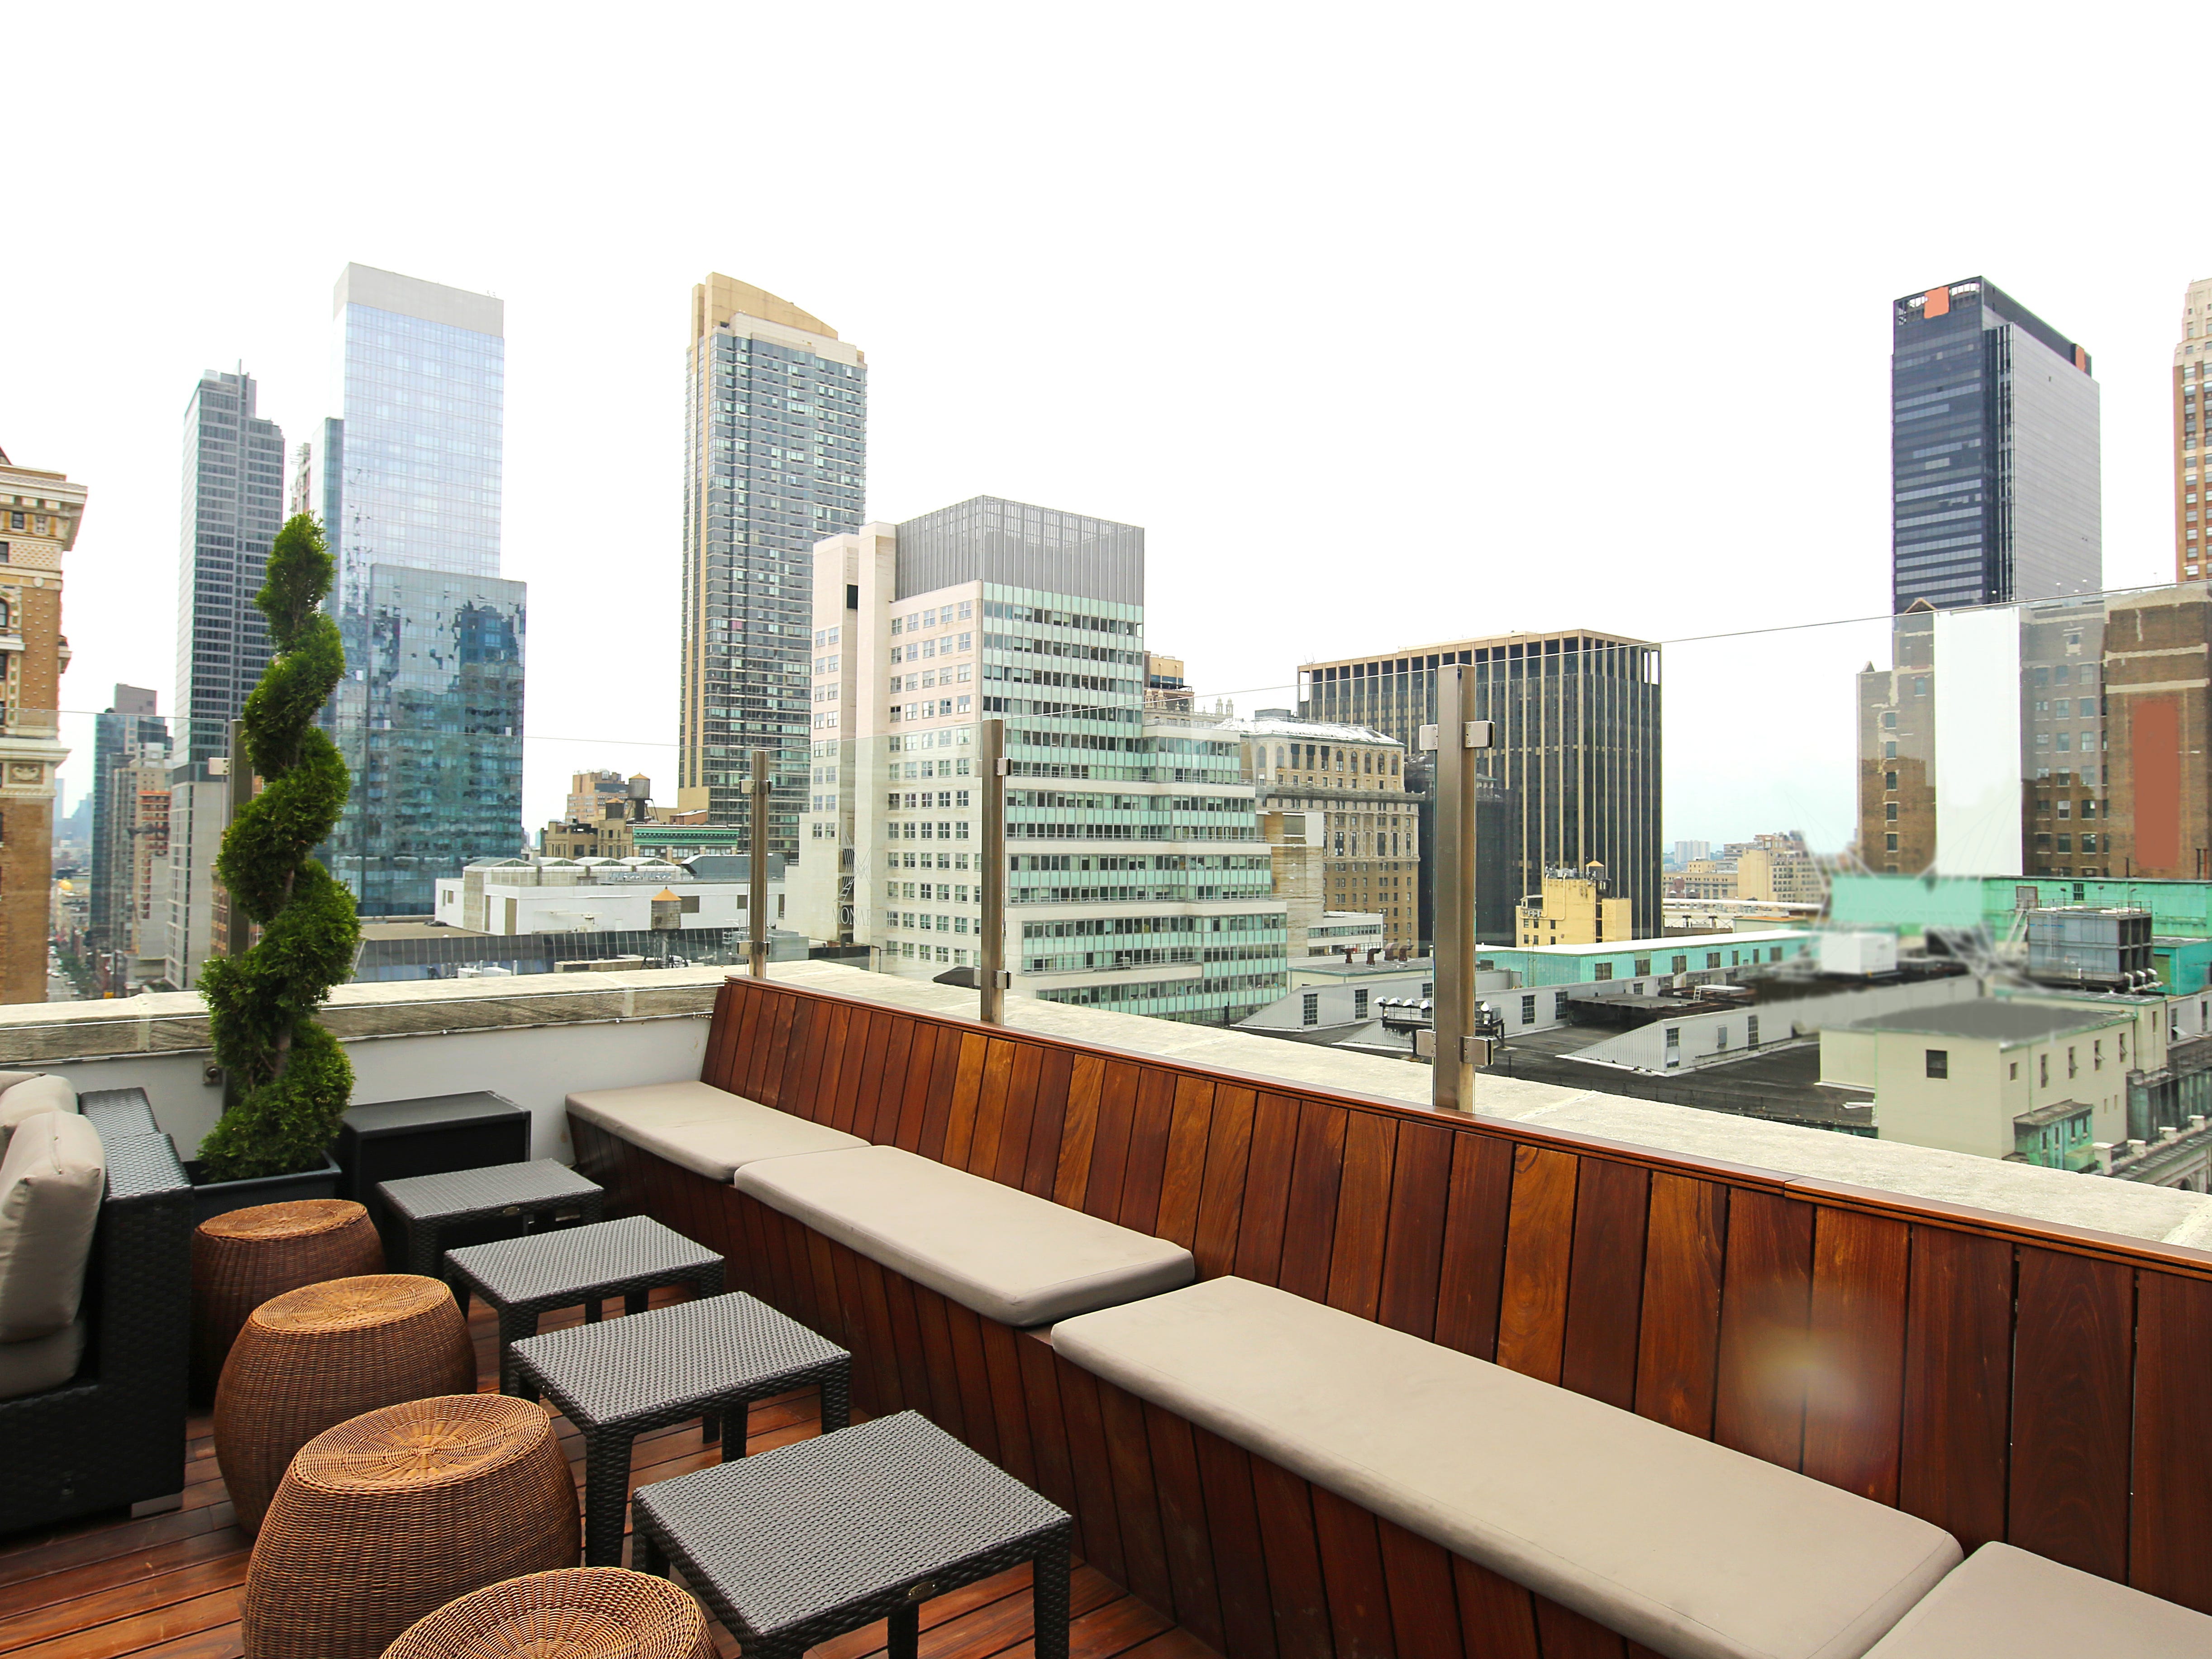 Rooftop-Lounge in NYC.